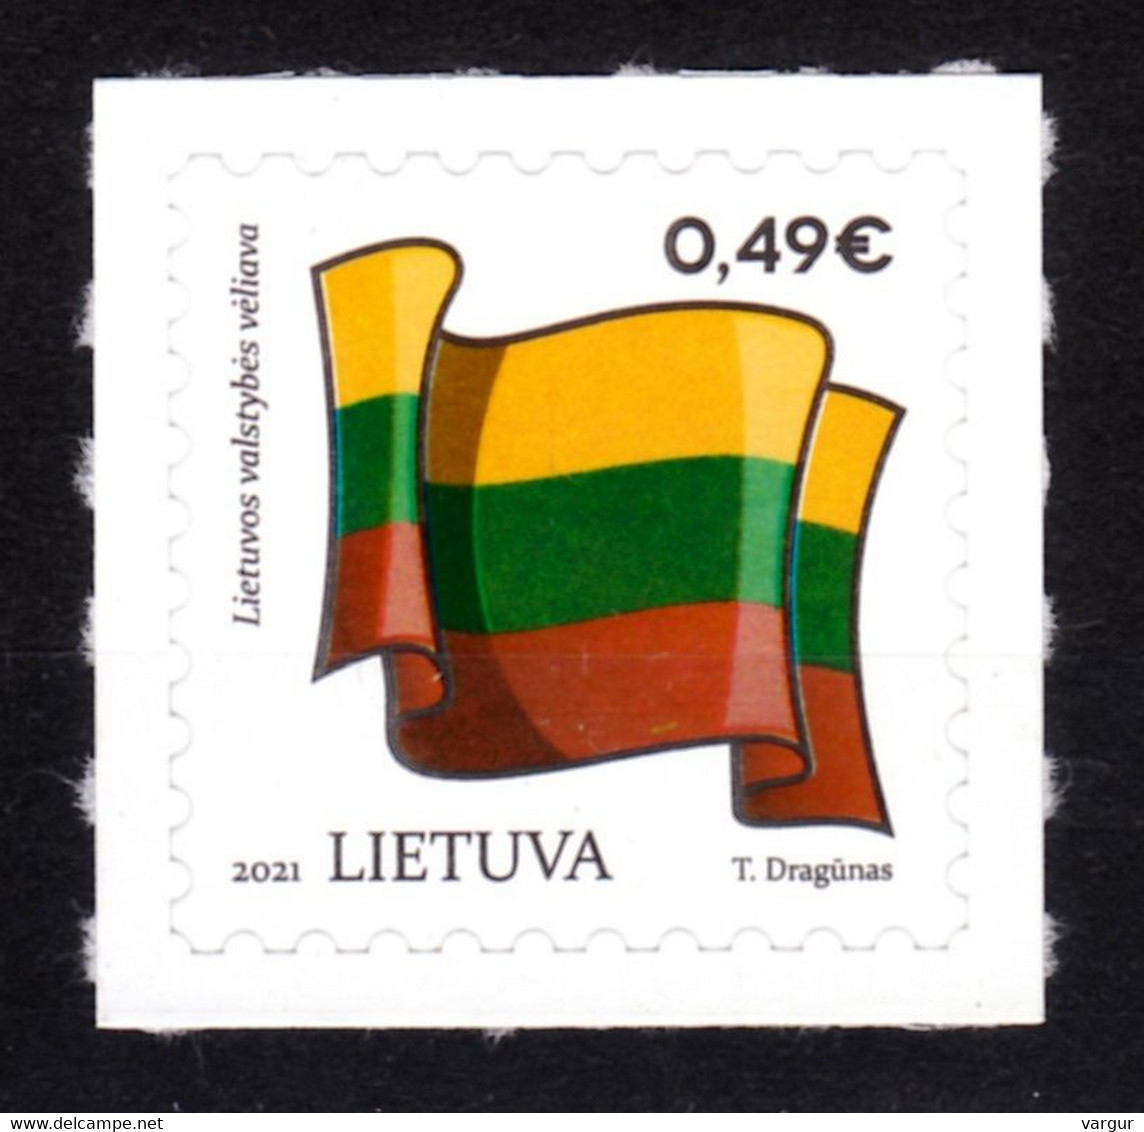 LITHUANIA 2021-12 Definitive: Flag, 49c Re-print With New Date, MINT Adhesive - Timbres